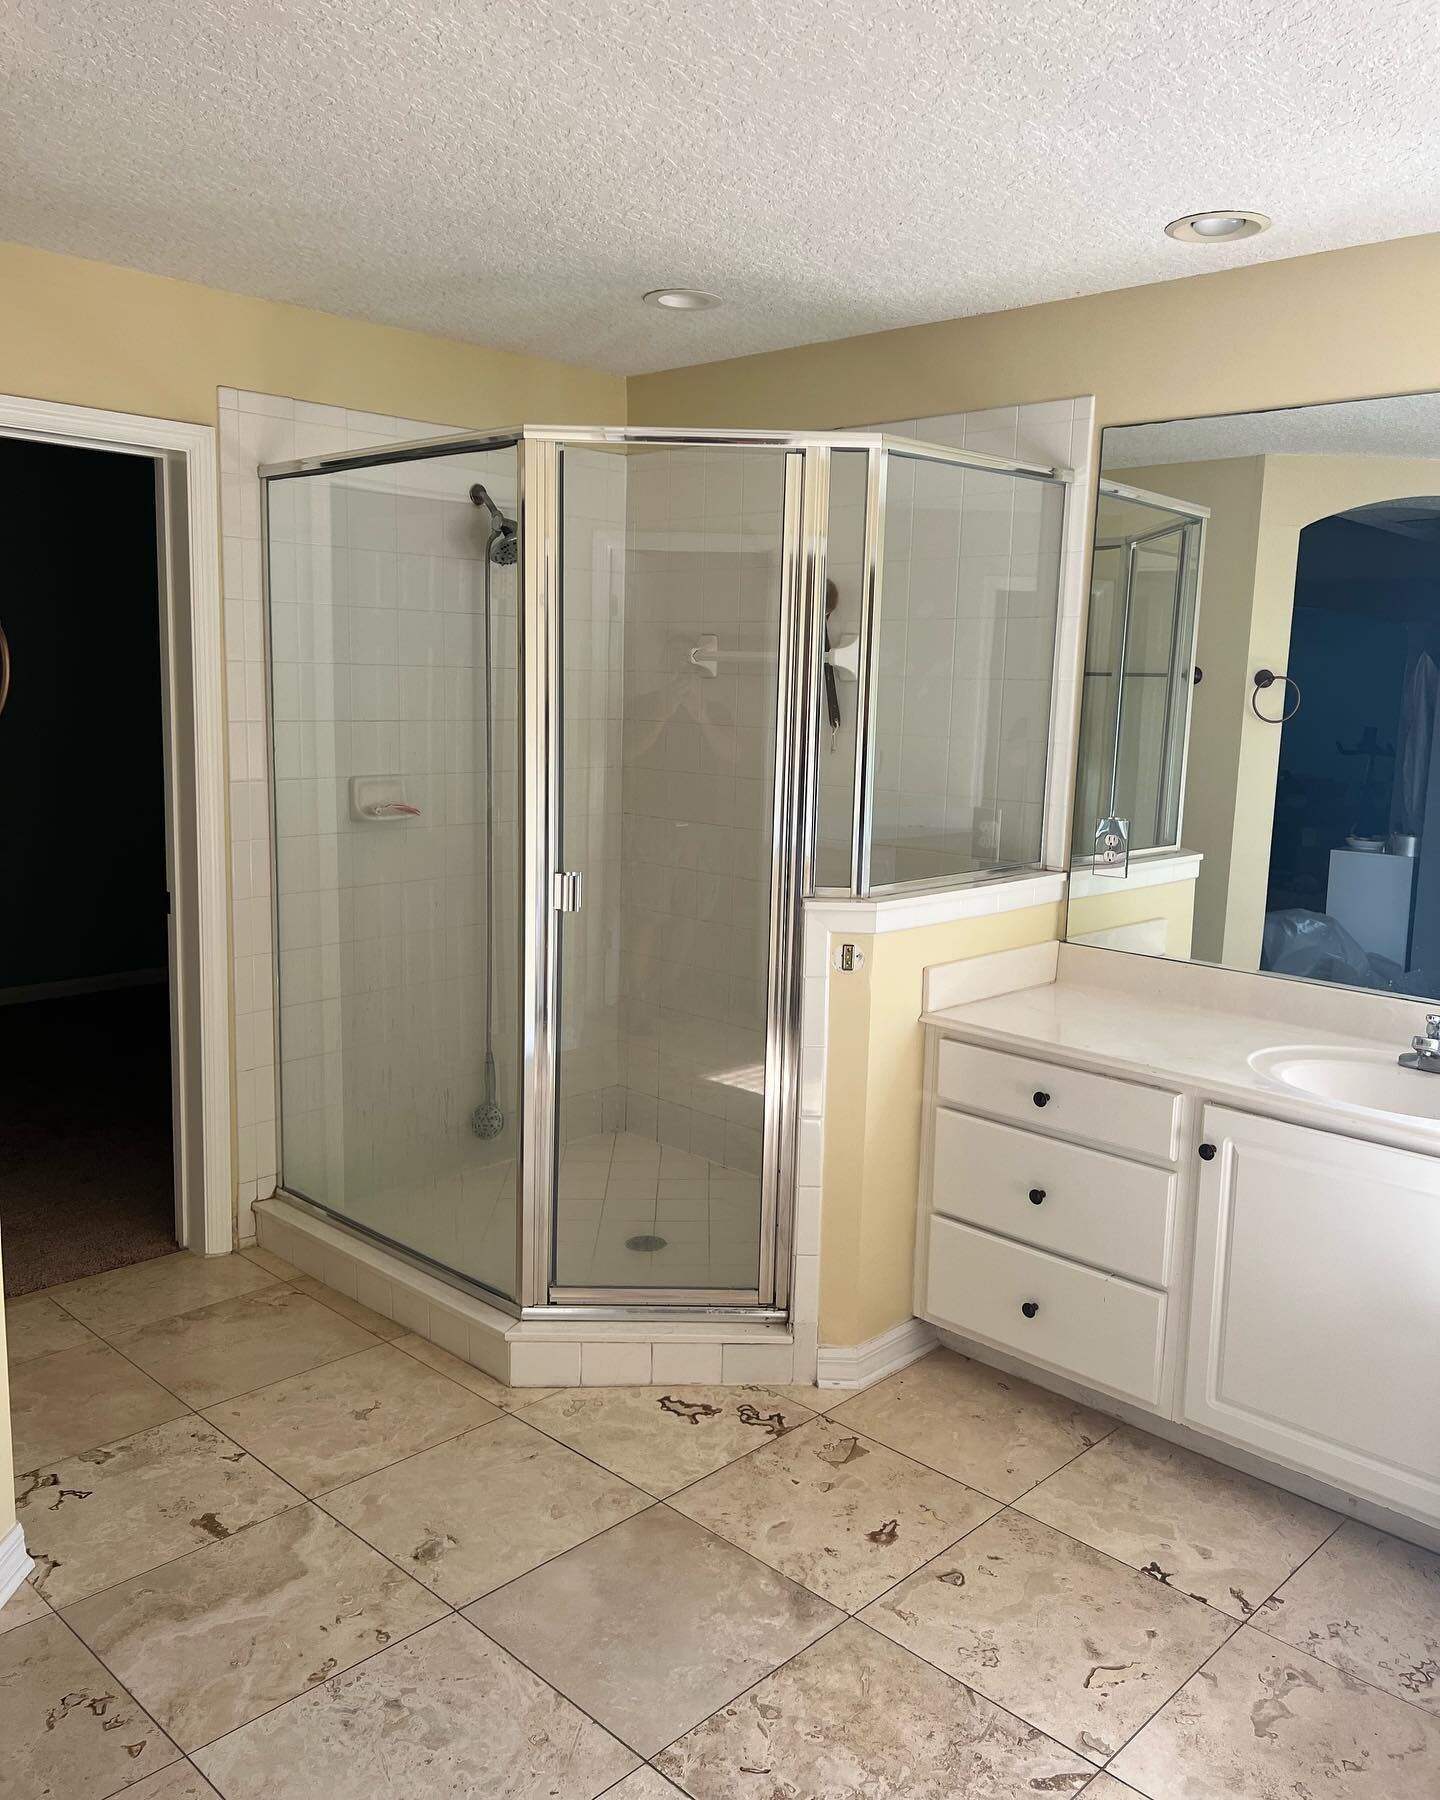 One more bathroom remodel done on August we install everything on this bathroom.  If you are looking for remodel bathroom, kitchen, floors please give us a call : (904)-613-7911